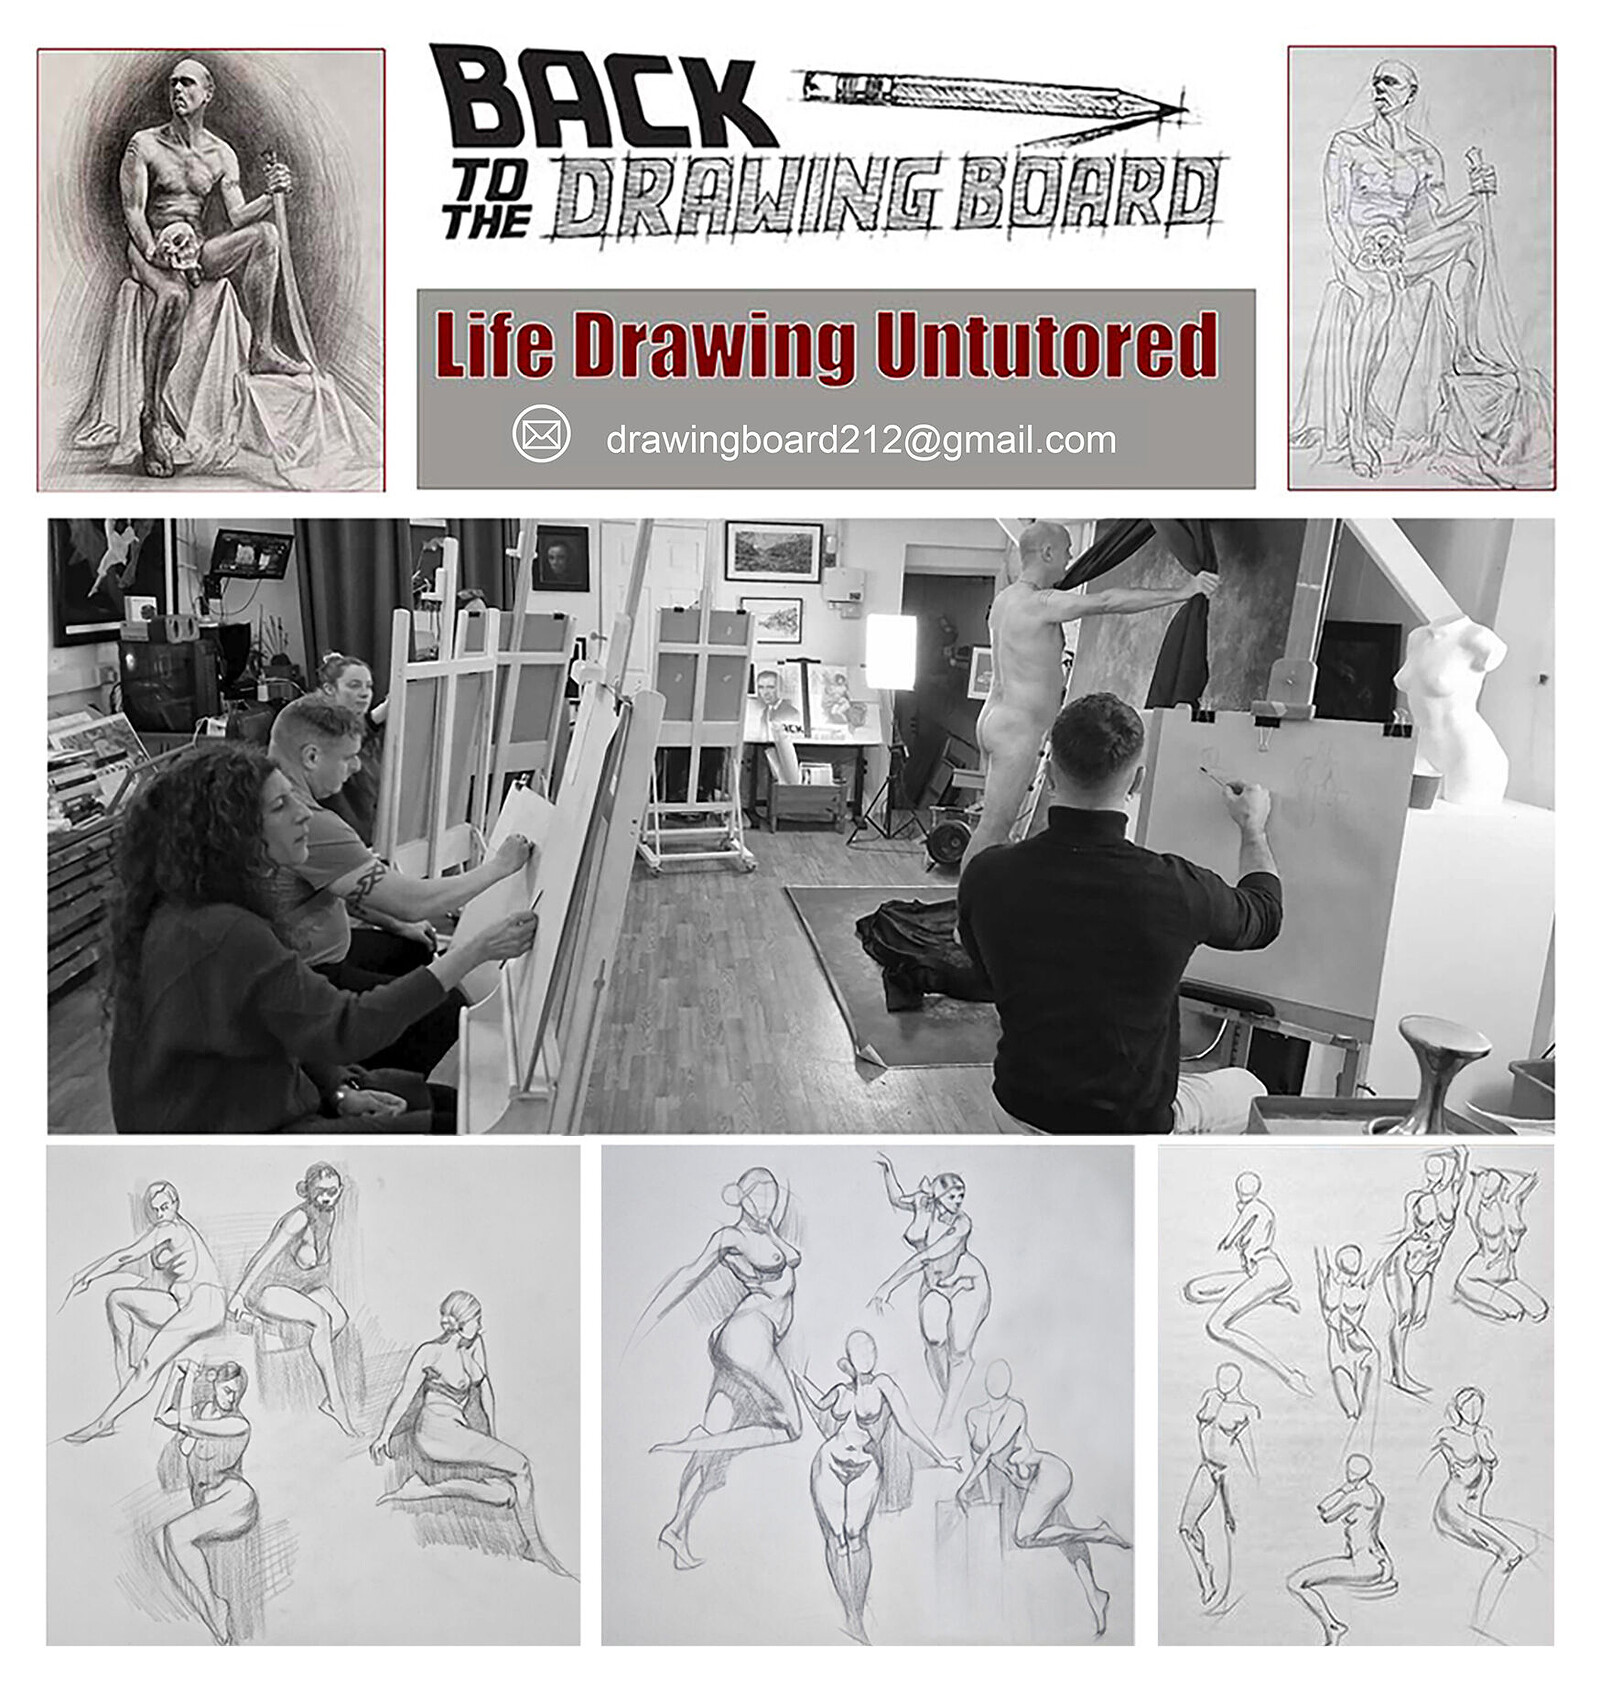 Life Drawing Untutored-Back to the Drawing Board at 212 Productions Studio